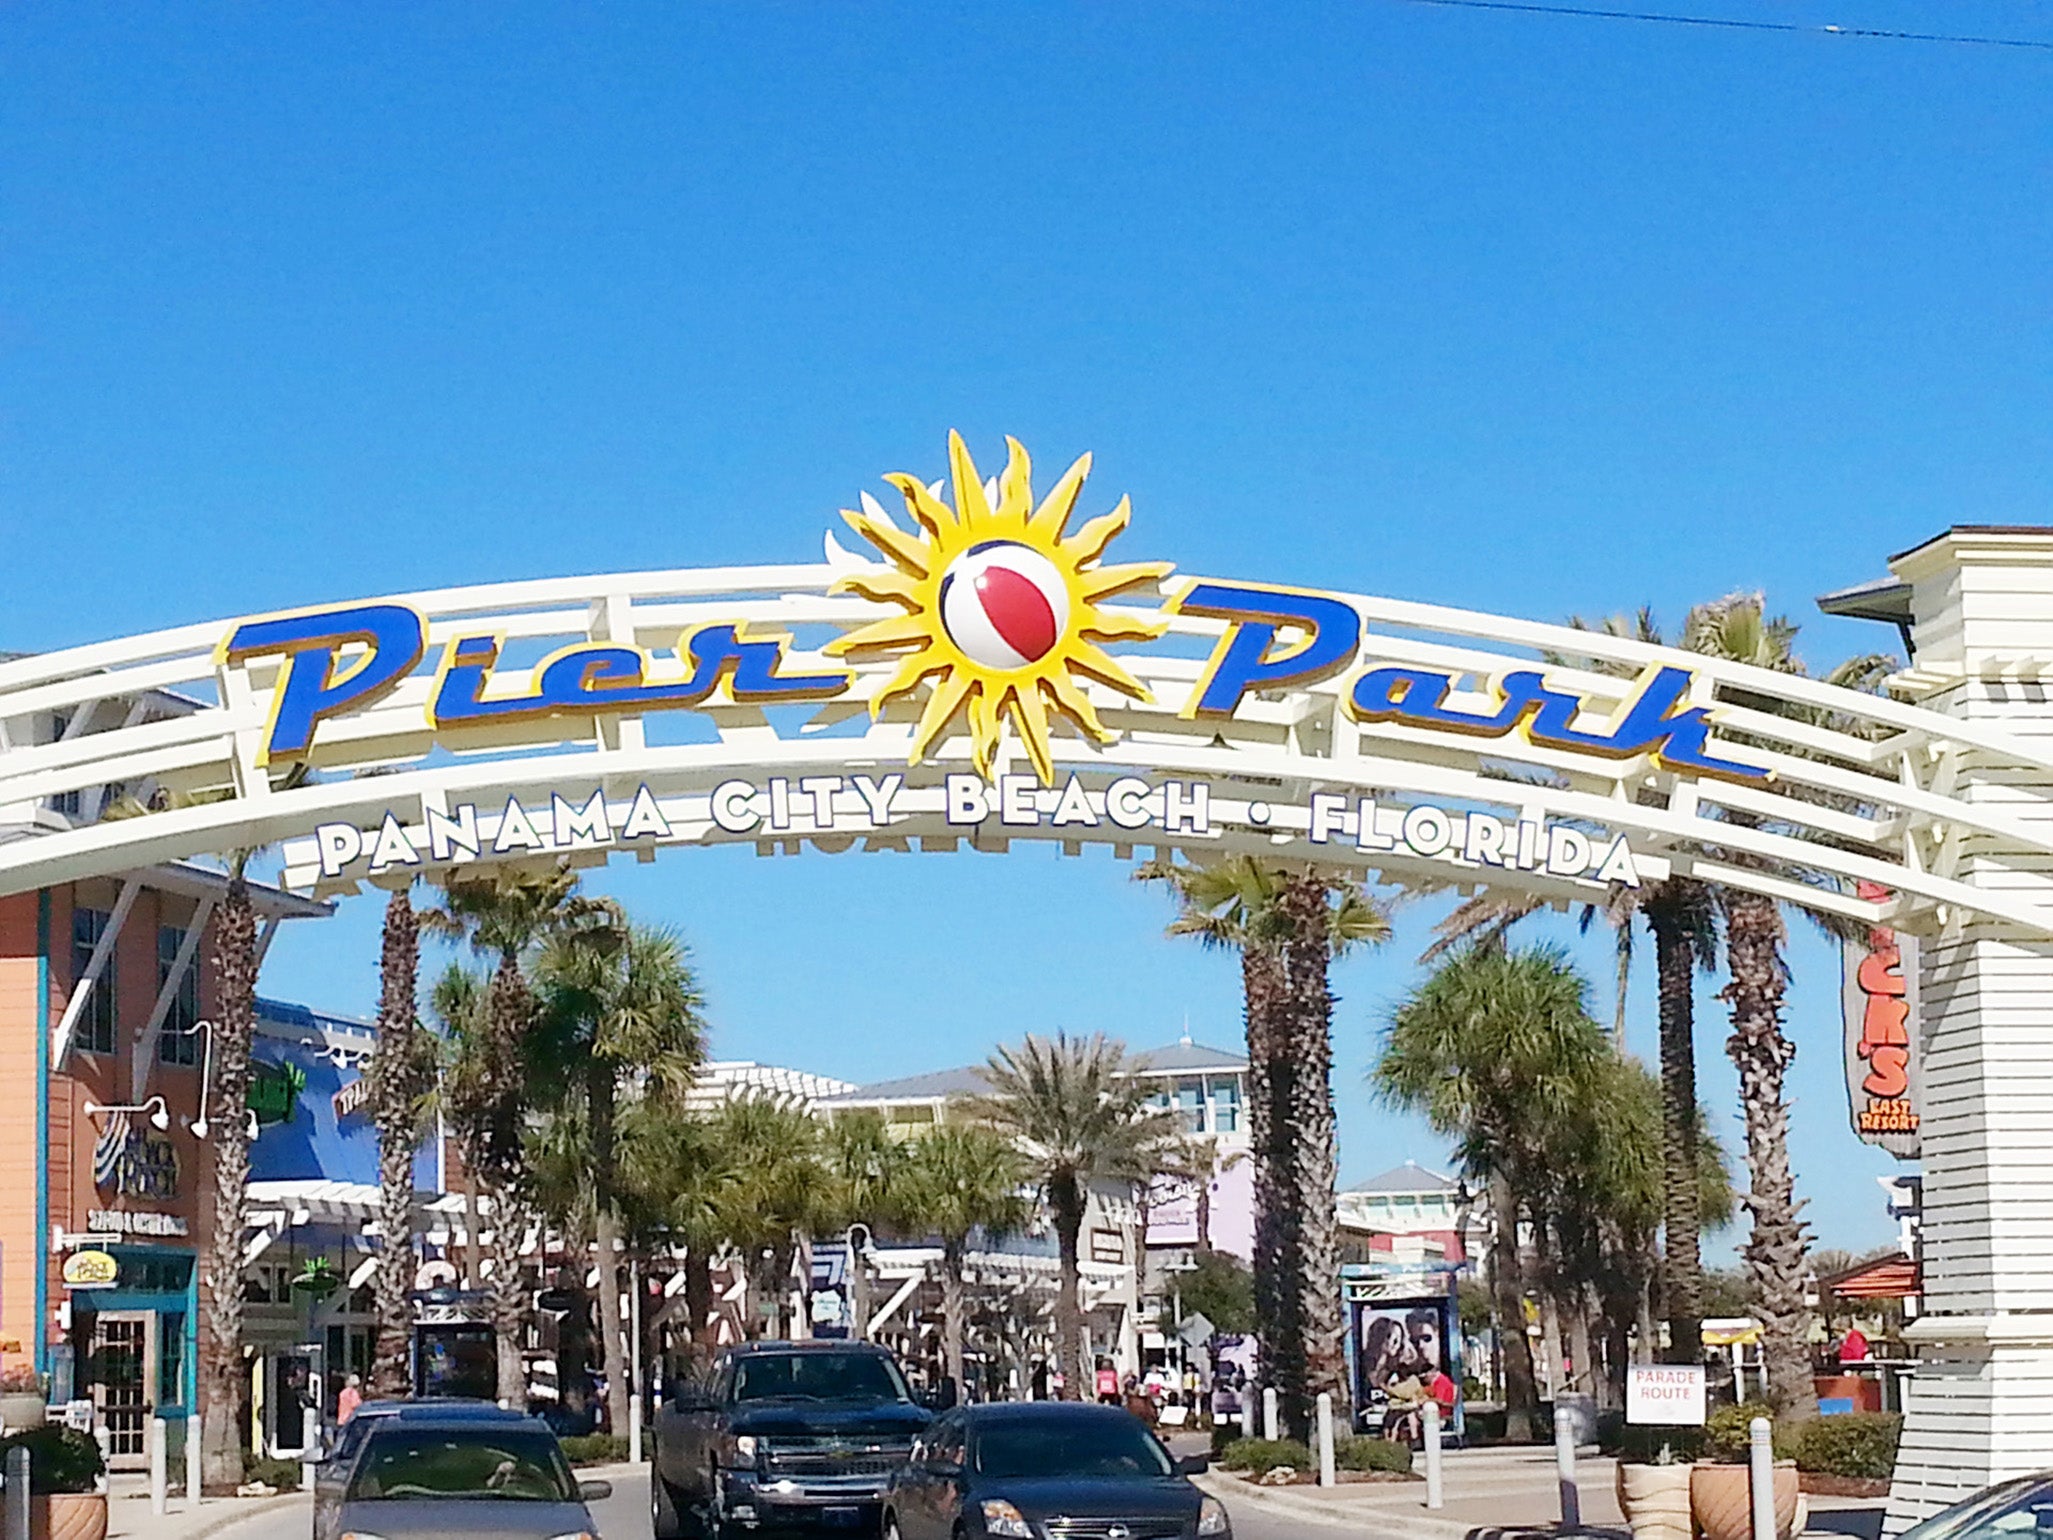 Check out Shopping and Restaurants at Pier Park